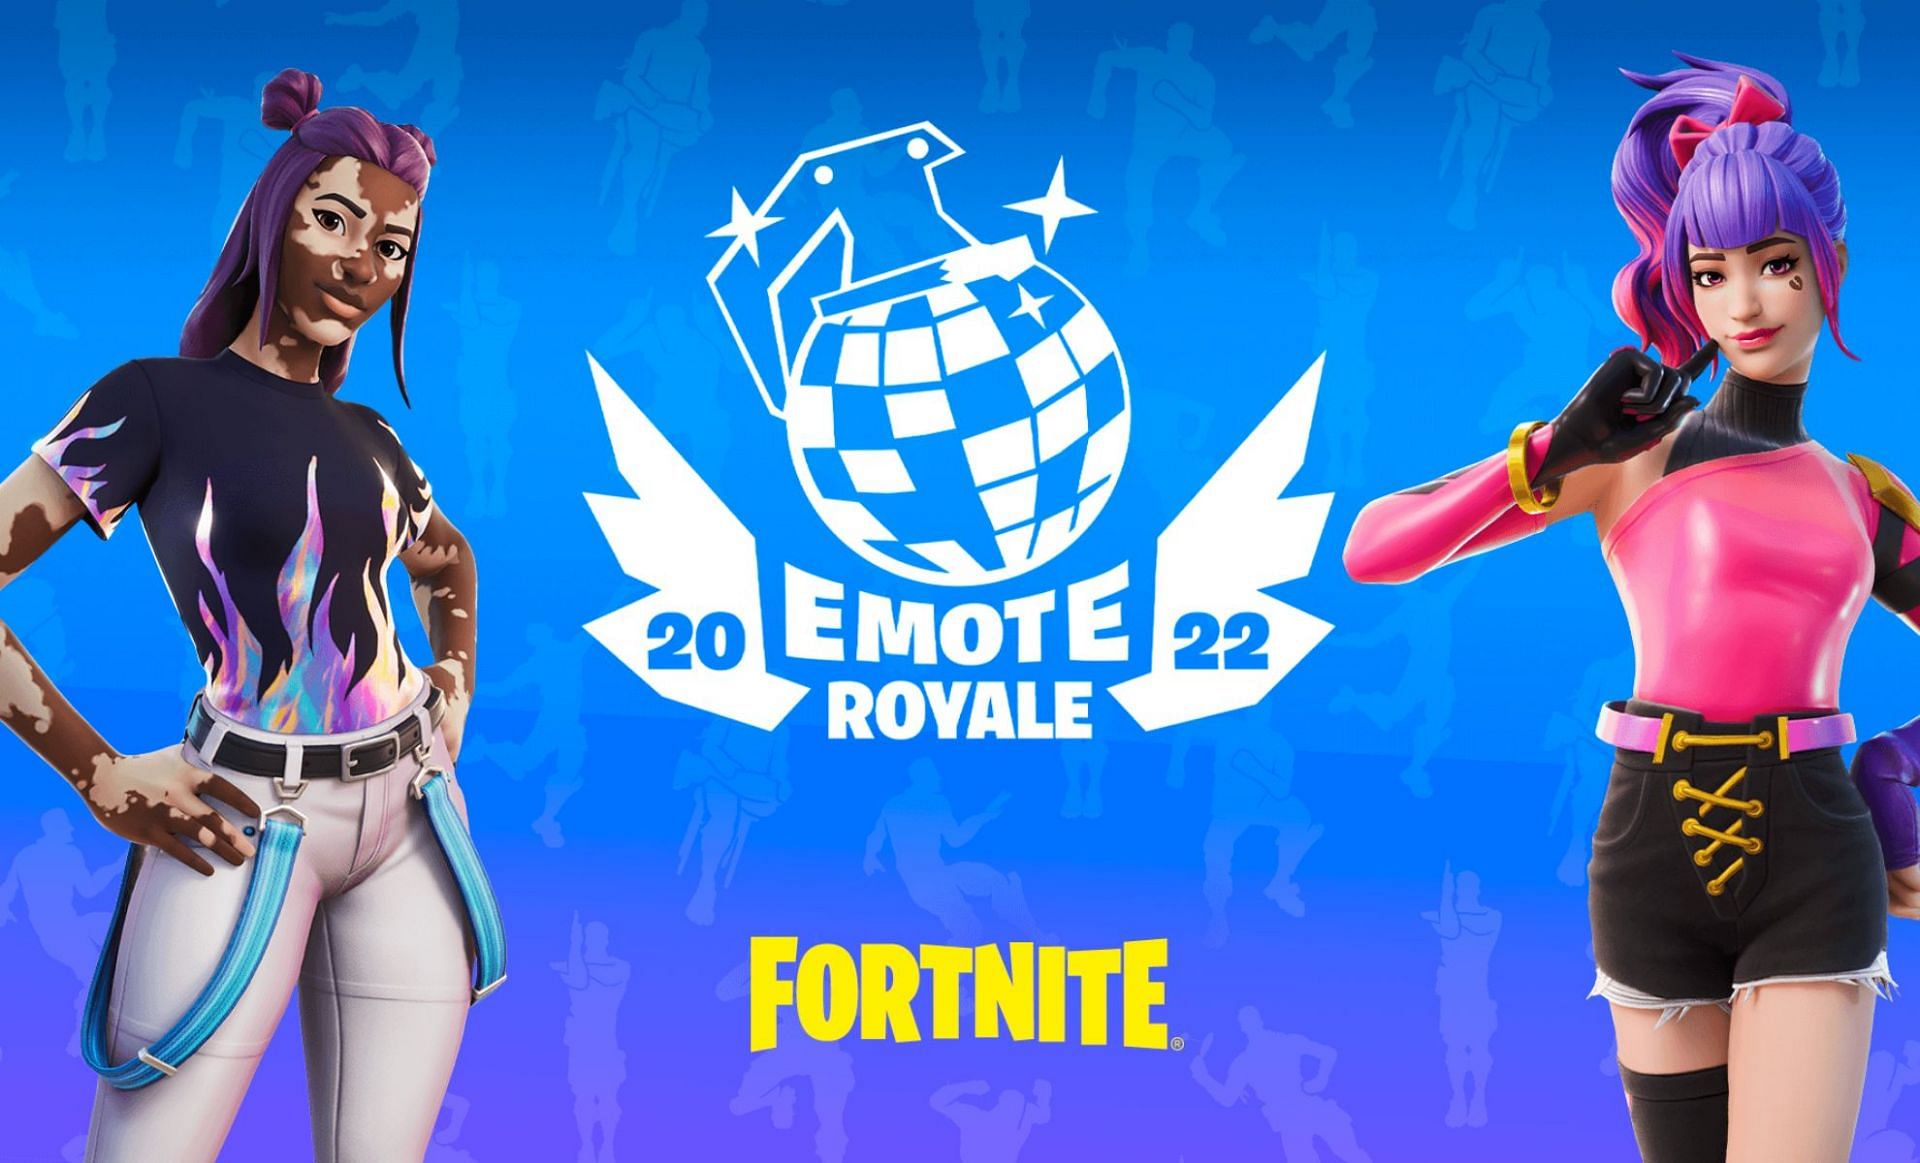 Emote Royale is an exciting venture in Fortnite (Image via Epic Games)